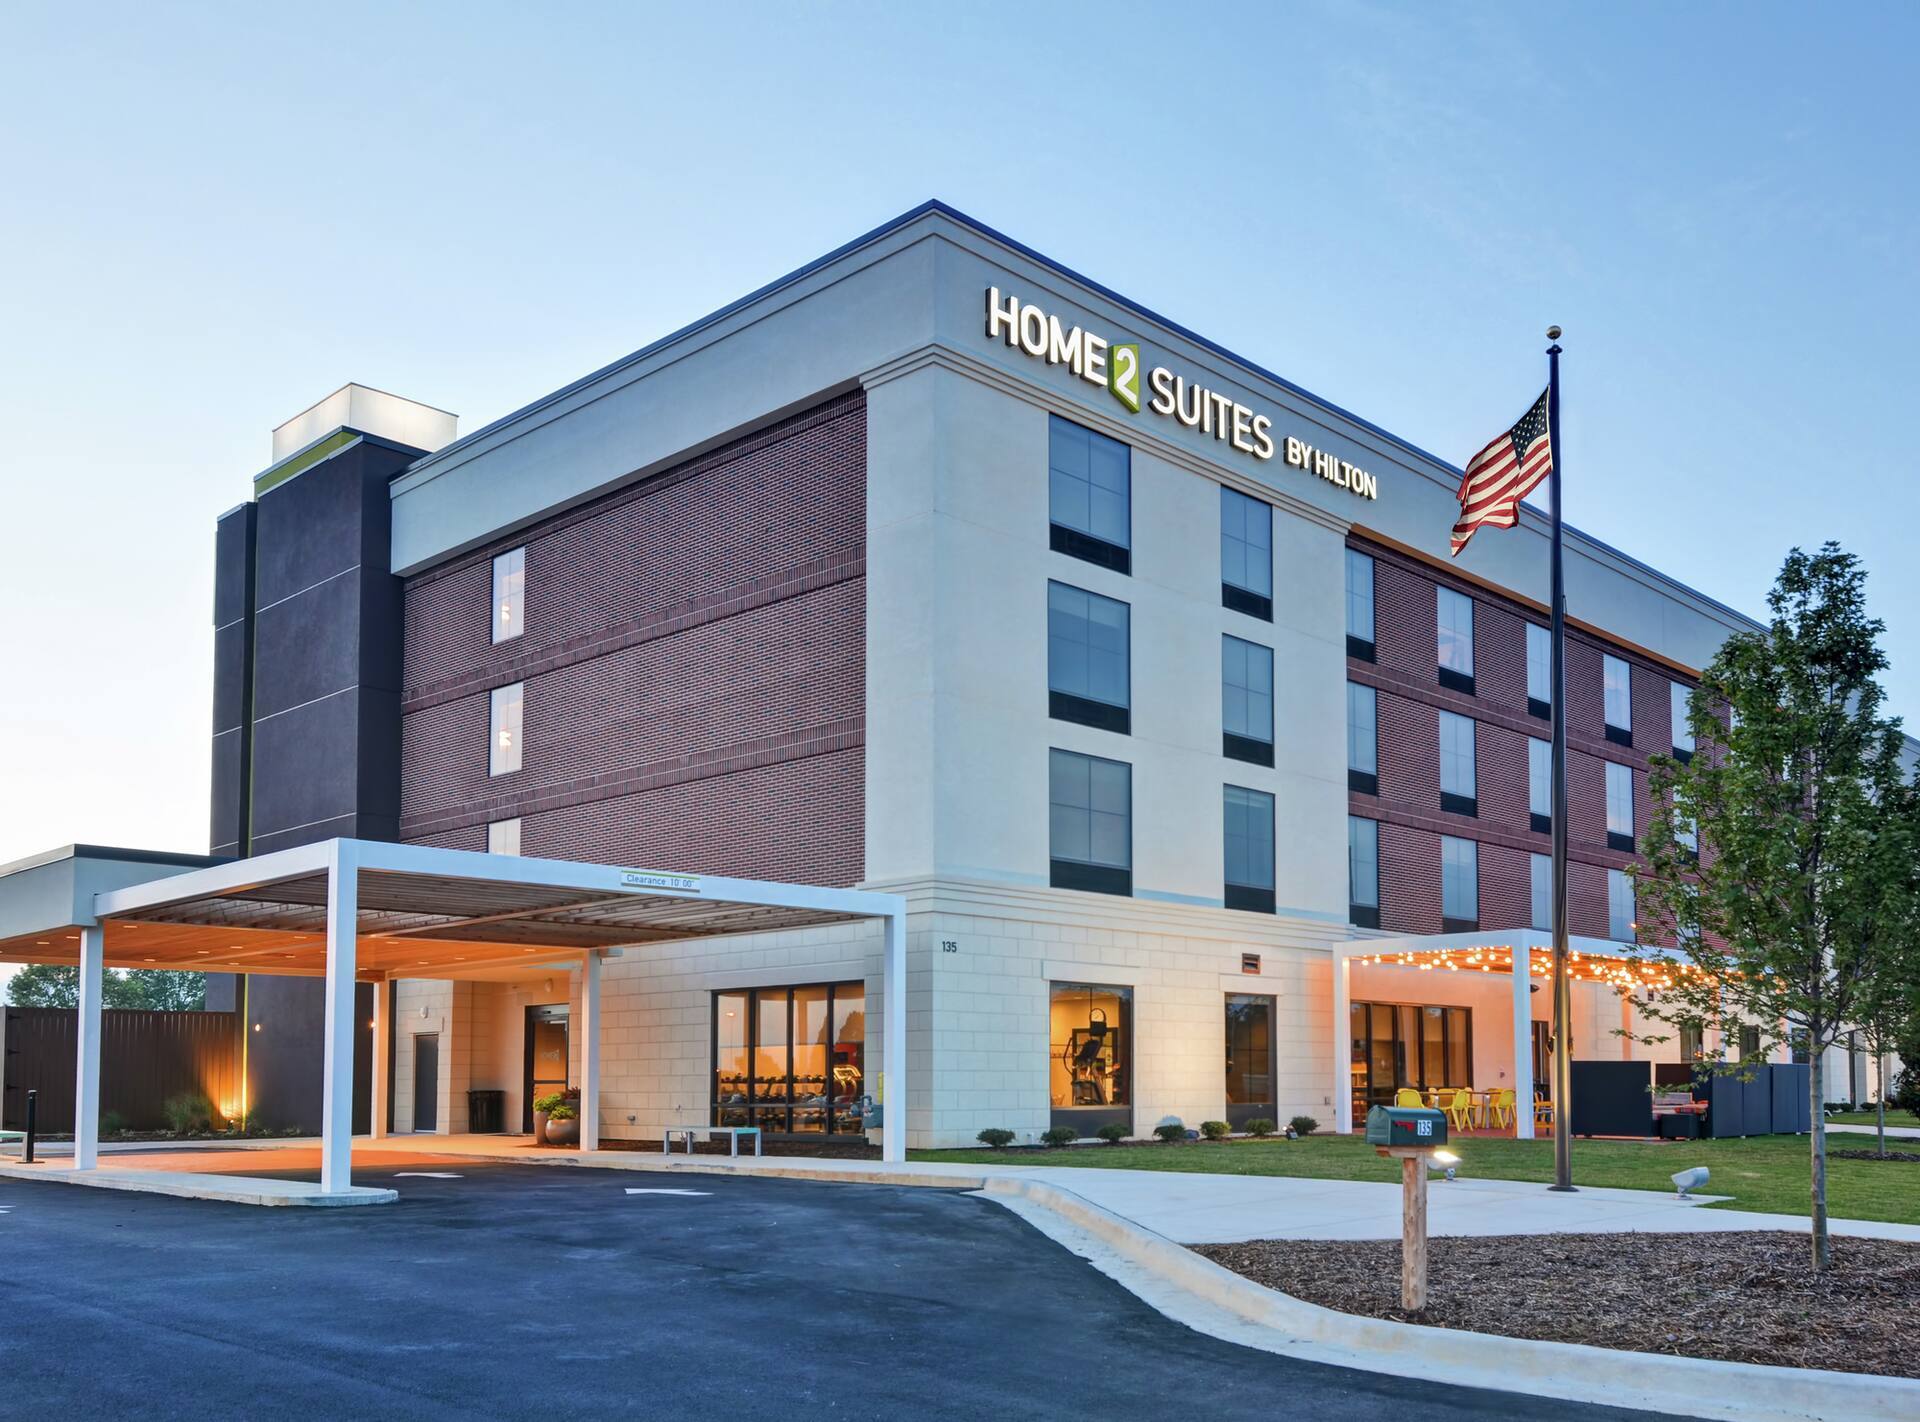 Photo of Home2 Suites by Hilton Madison Huntsville Airport, Madison, AL